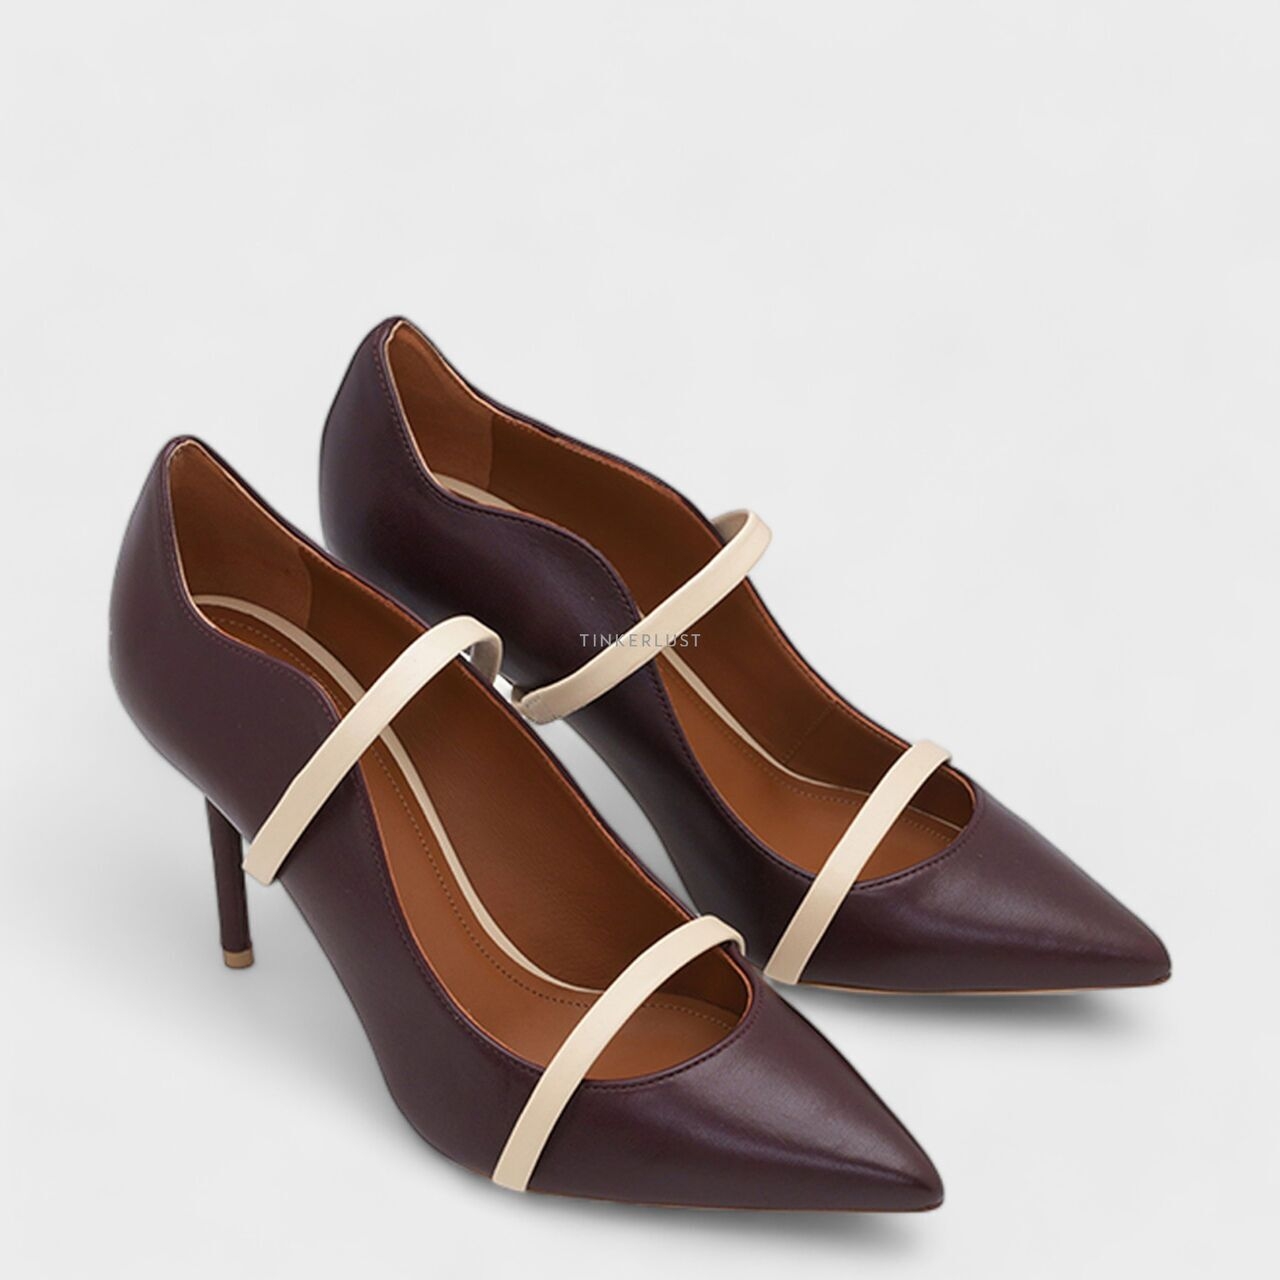 Malone Souliers Maureen Heeled Pumps 85mm in Chocolate/Butter